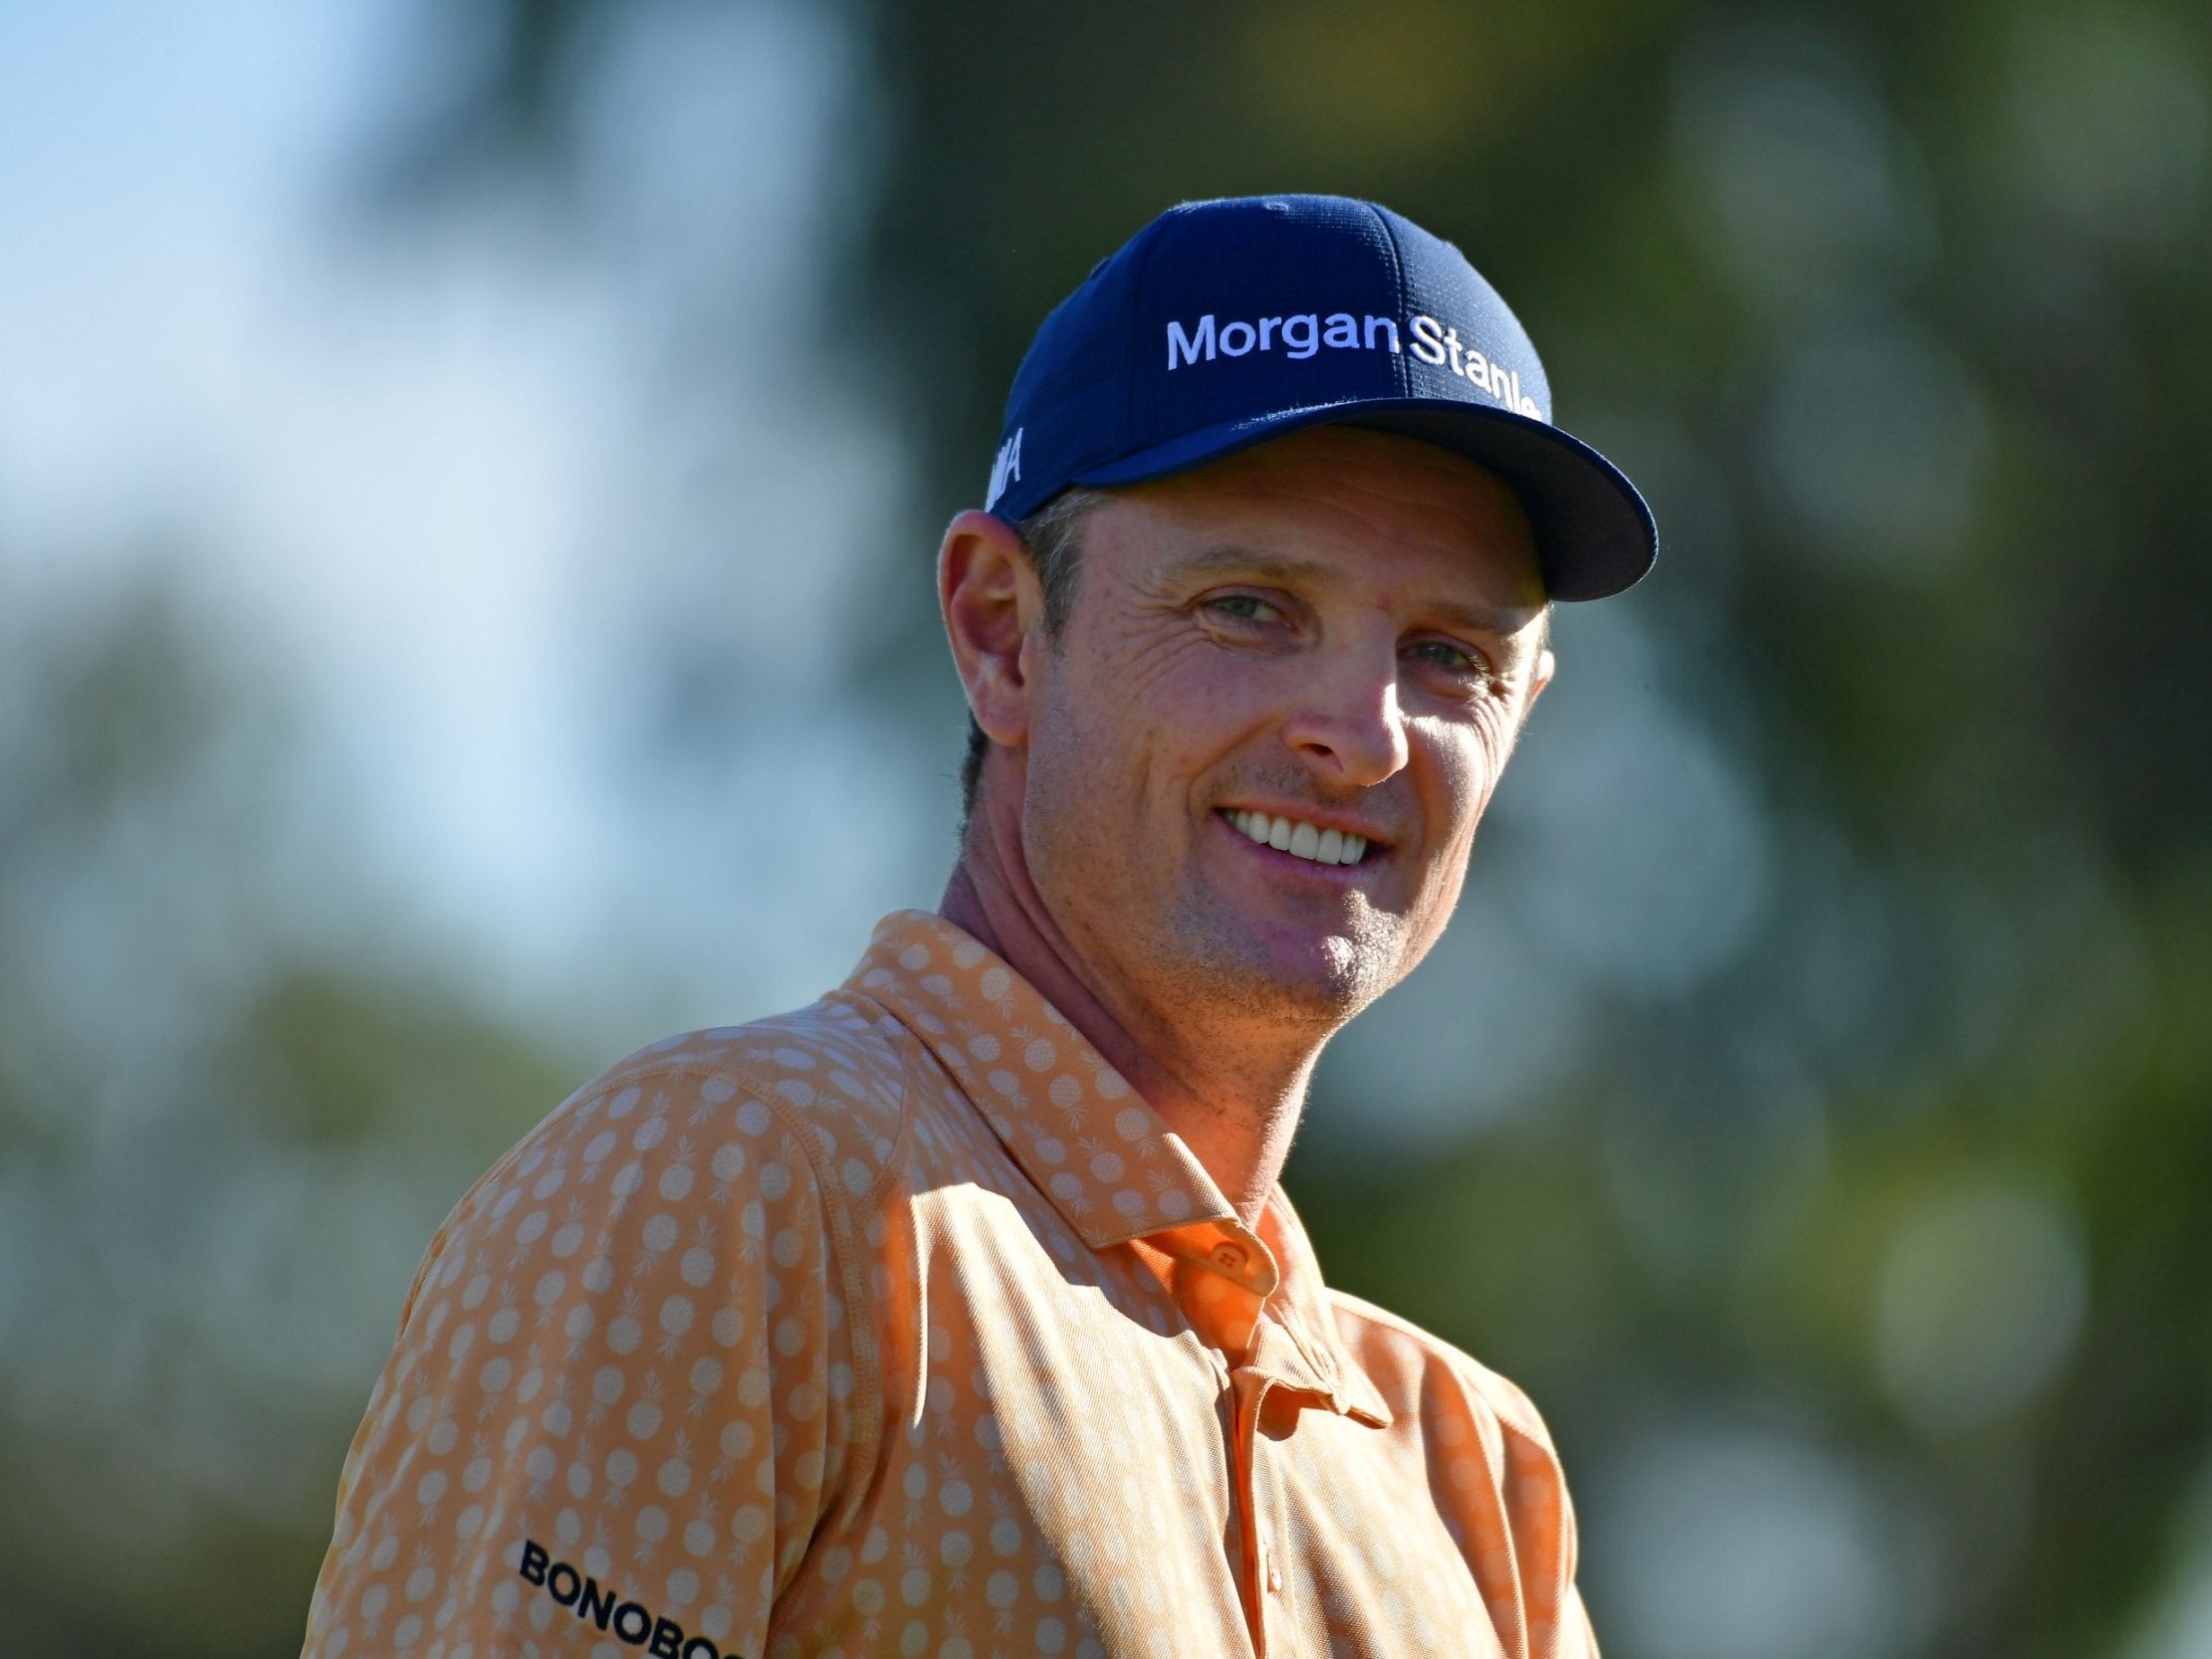 Justin Rose has been criticised for his planned appearance in Saudi Arabia this week